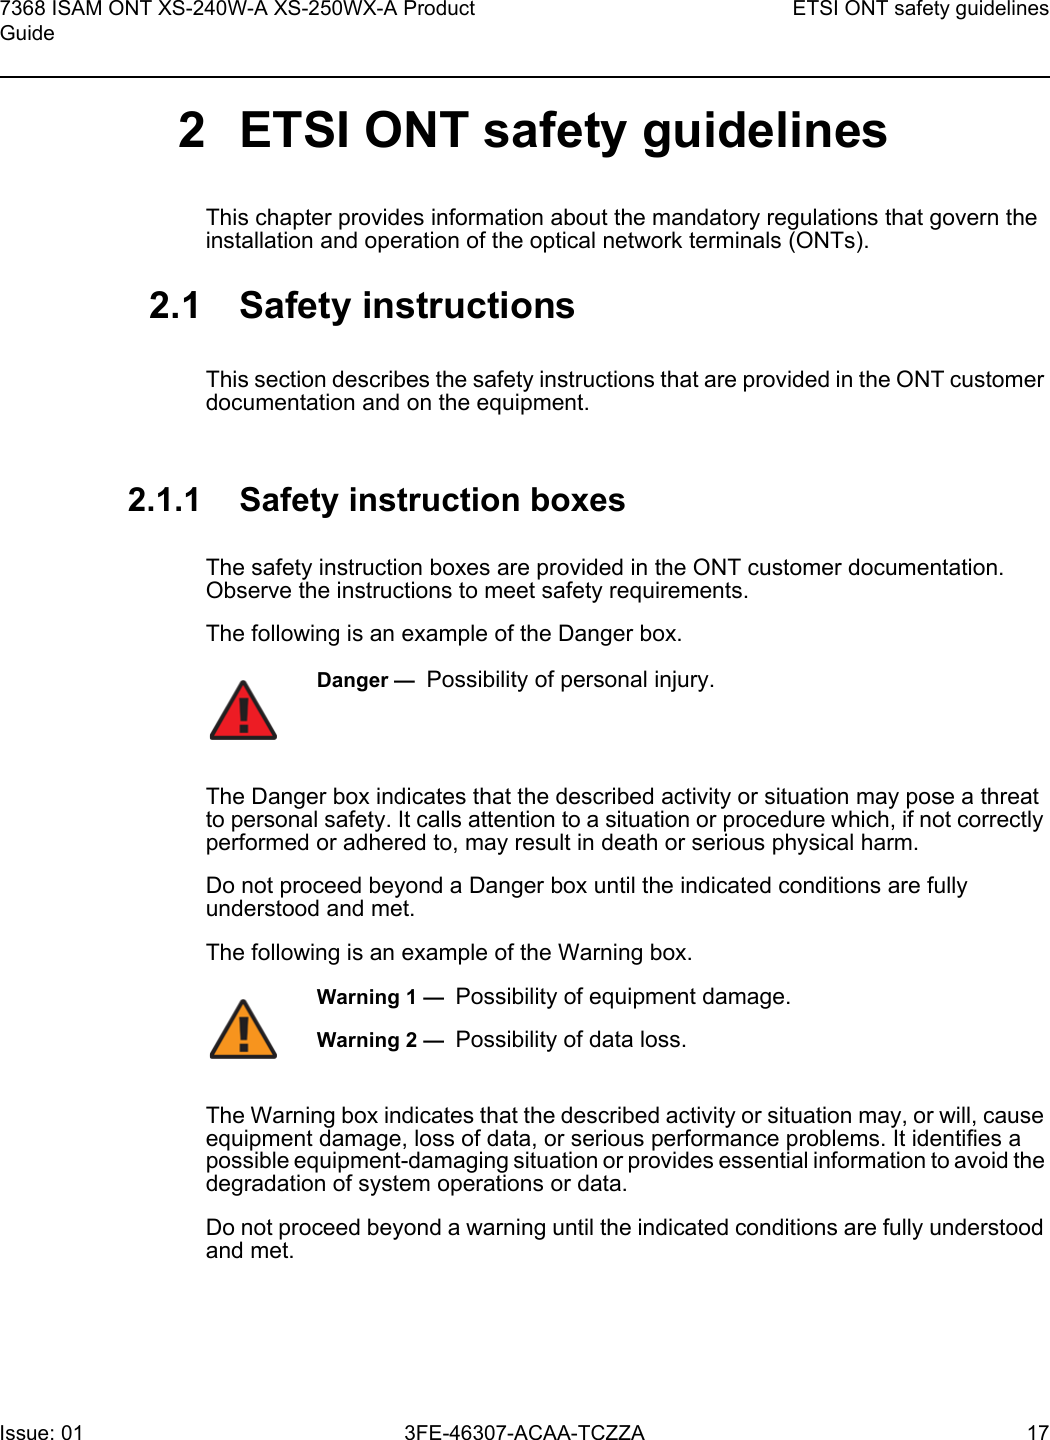 7368 ISAM ONT XS-240W-A XS-250WX-A Product GuideETSI ONT safety guidelinesIssue: 01 3FE-46307-ACAA-TCZZA 17 2 ETSI ONT safety guidelinesThis chapter provides information about the mandatory regulations that govern the installation and operation of the optical network terminals (ONTs).2.1 Safety instructionsThis section describes the safety instructions that are provided in the ONT customer documentation and on the equipment.2.1.1 Safety instruction boxesThe safety instruction boxes are provided in the ONT customer documentation. Observe the instructions to meet safety requirements.The following is an example of the Danger box.The Danger box indicates that the described activity or situation may pose a threat to personal safety. It calls attention to a situation or procedure which, if not correctly performed or adhered to, may result in death or serious physical harm. Do not proceed beyond a Danger box until the indicated conditions are fully understood and met.The following is an example of the Warning box.The Warning box indicates that the described activity or situation may, or will, cause equipment damage, loss of data, or serious performance problems. It identifies a possible equipment-damaging situation or provides essential information to avoid the degradation of system operations or data.Do not proceed beyond a warning until the indicated conditions are fully understood and met.Danger —  Possibility of personal injury. Warning 1 —  Possibility of equipment damage.Warning 2 —  Possibility of data loss.